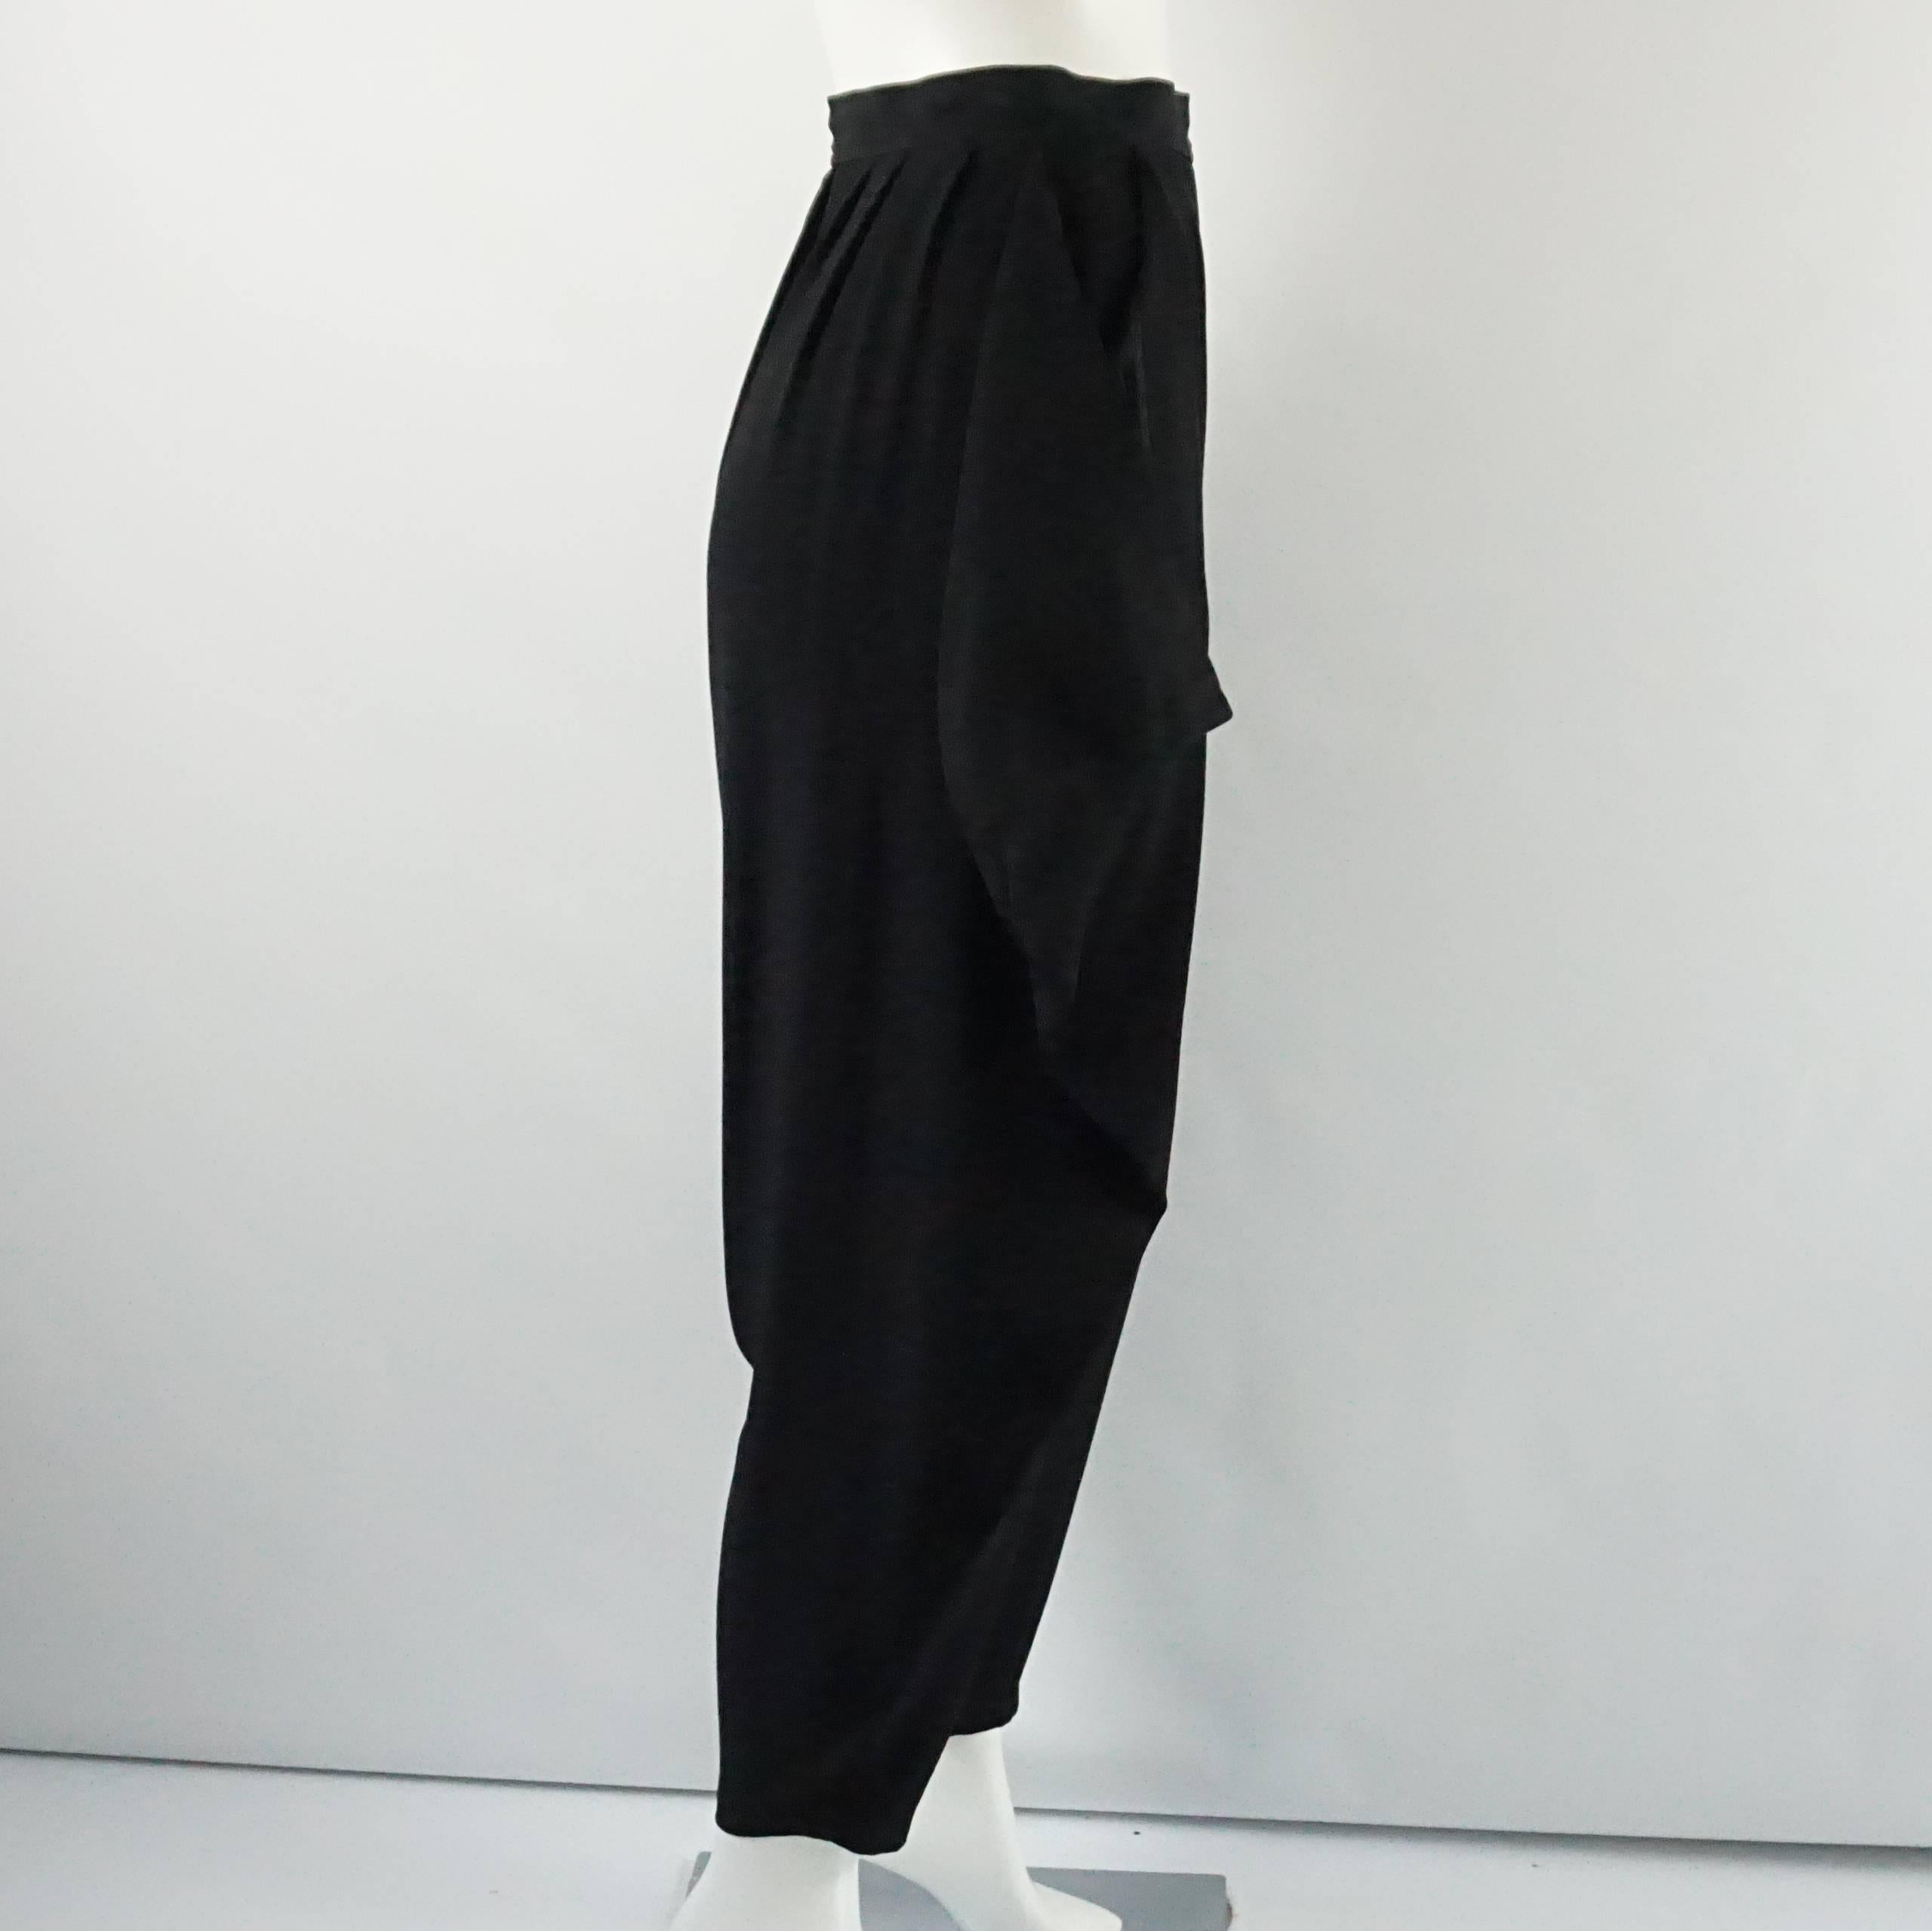 These YSL black pants are made of wool. They are high waisted and are a harem style with ruched fabric along the sides. The pants are in excellent vintage condition with very minor general wear to the fabric. Size S, circa 1980's.